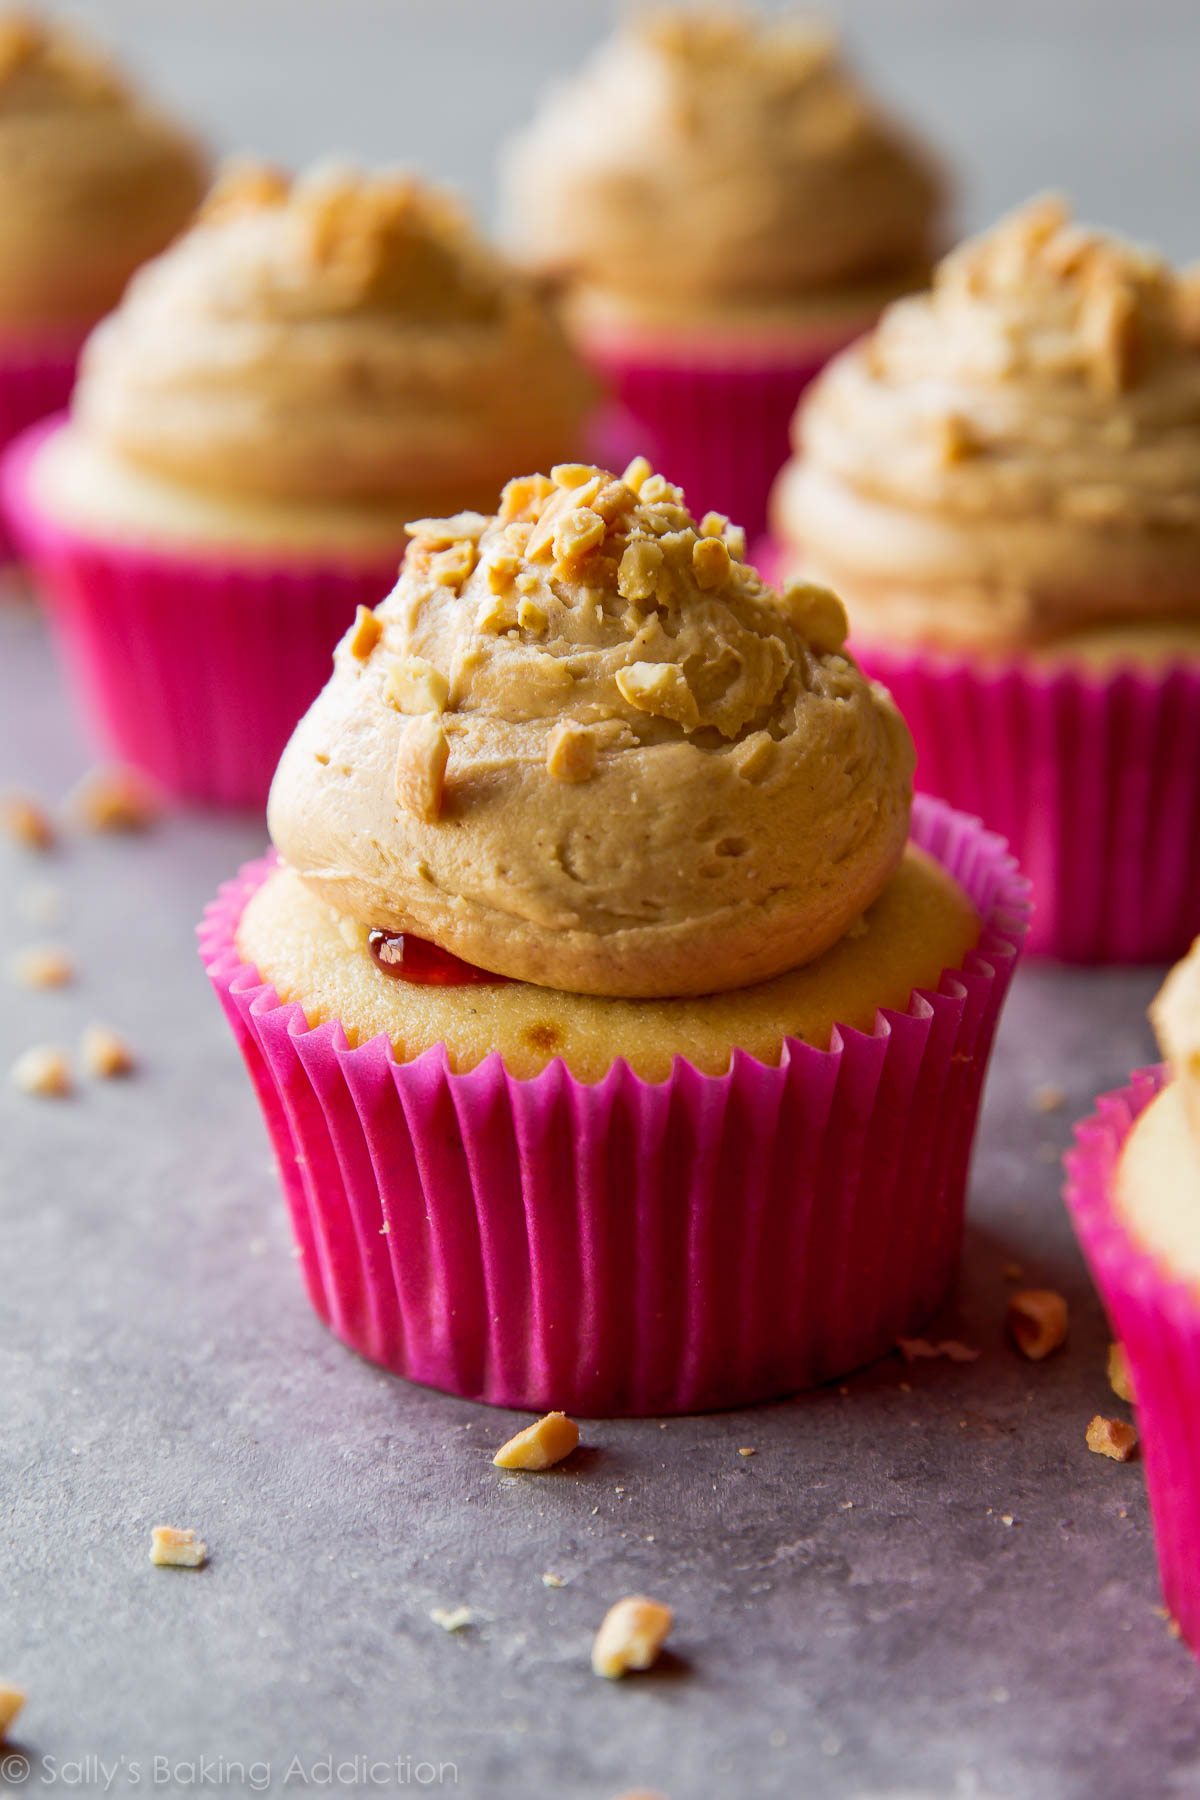 Frosting Cupcakes with Peanut Butter Jelly